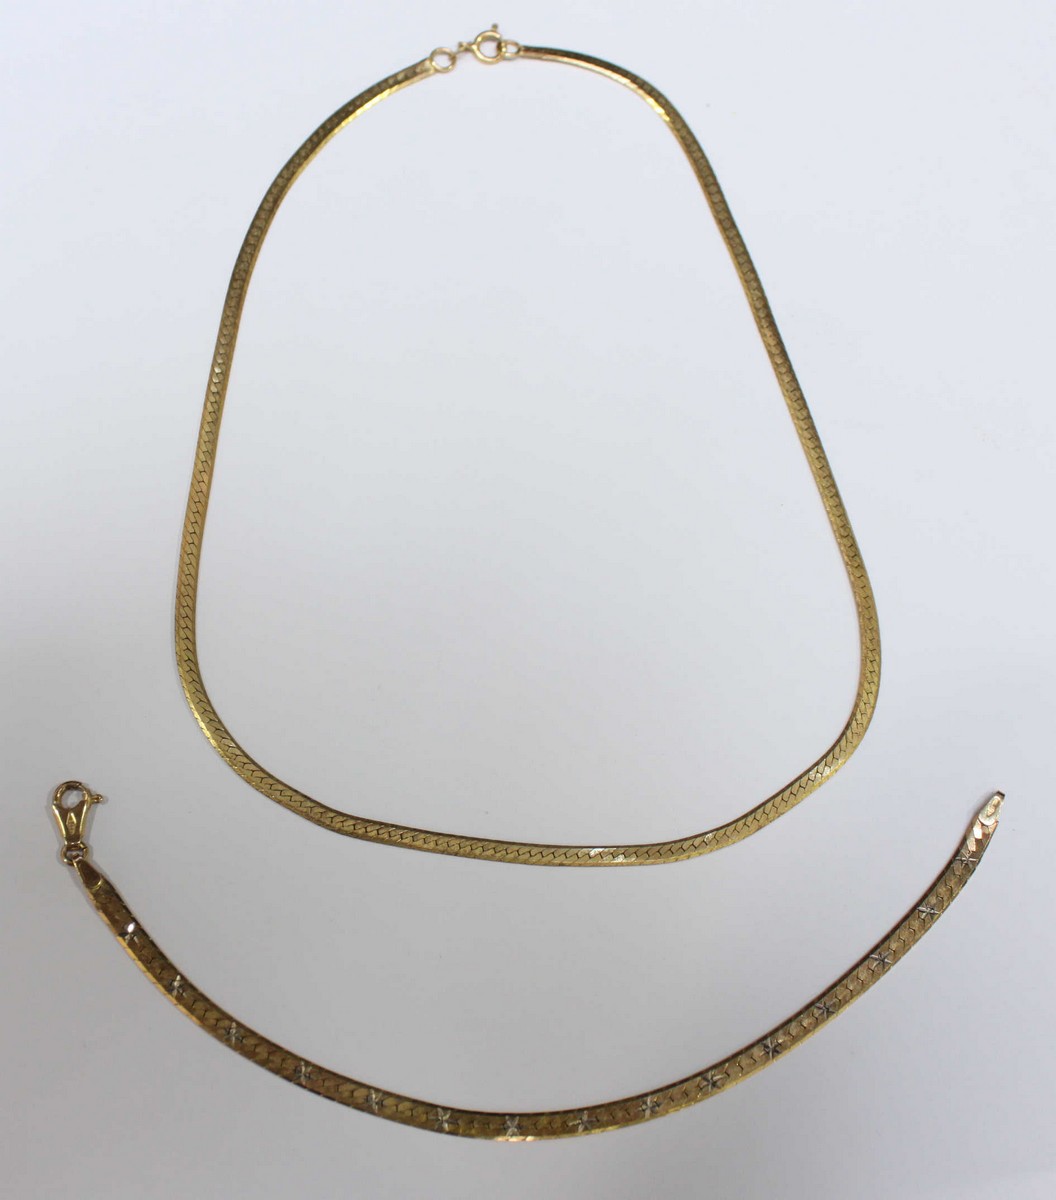 A flat 9ct gold necklace and similar gold bracelet. 13.8 grams total.